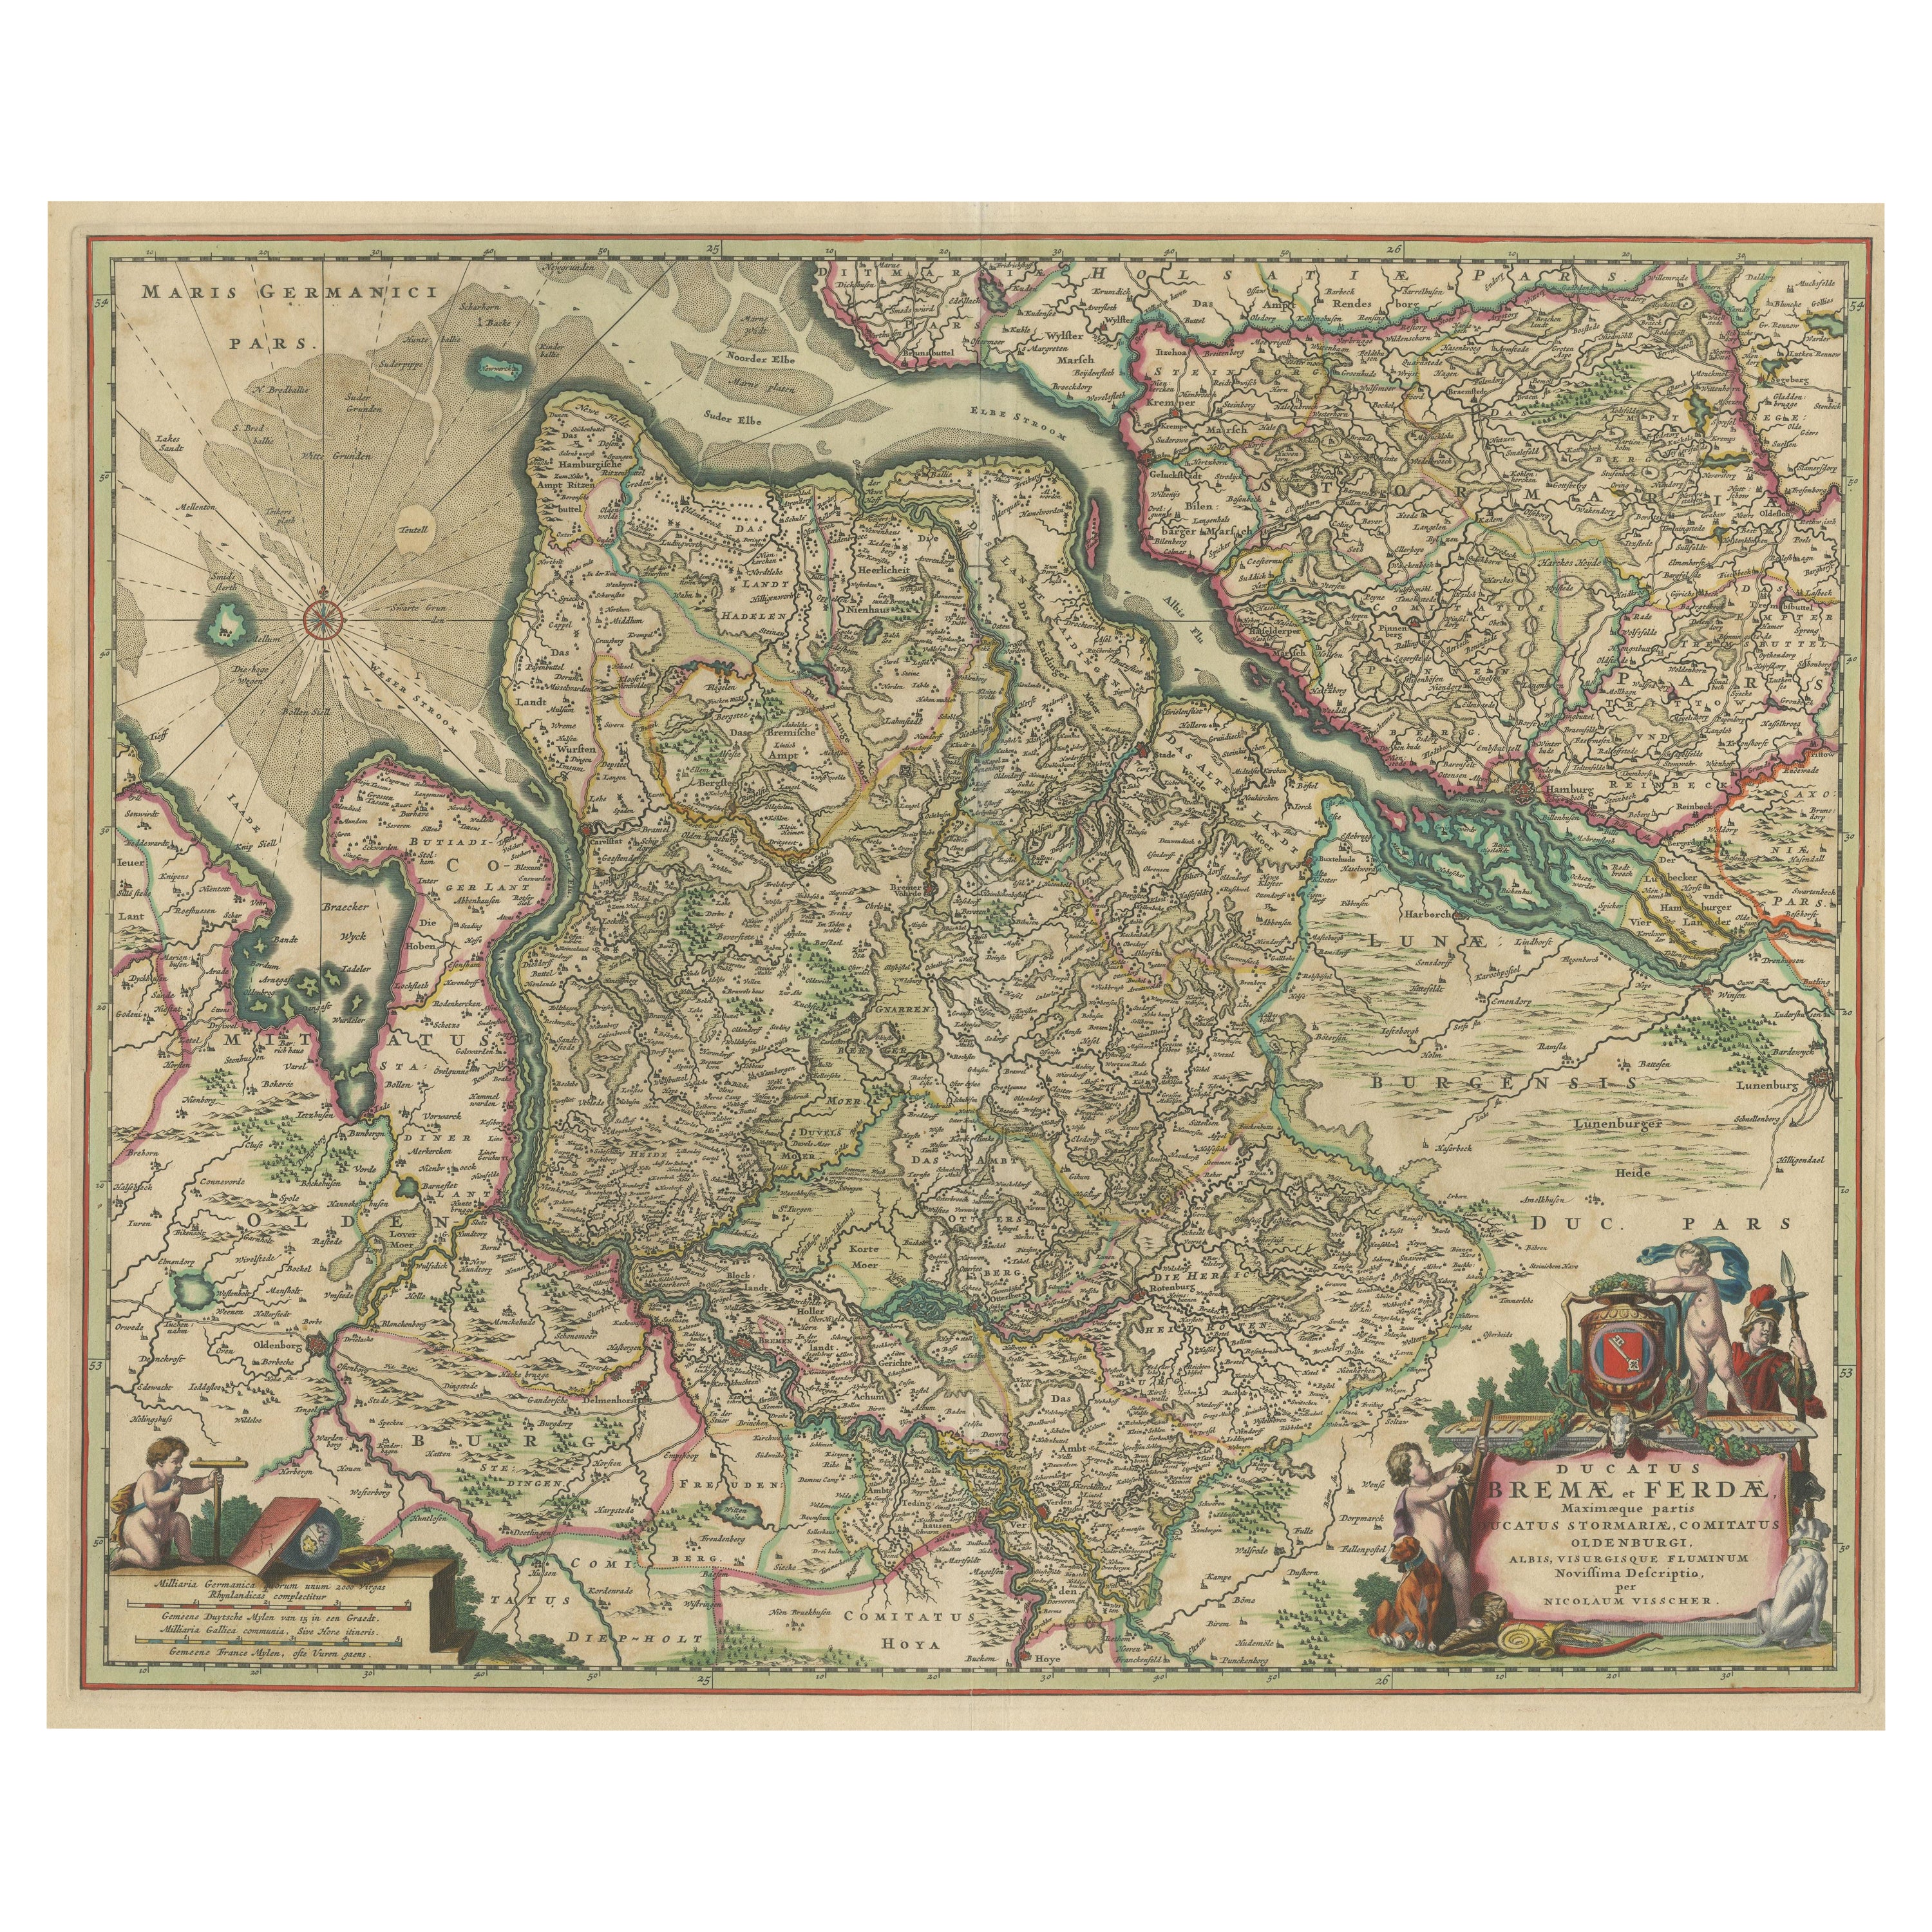 Antique Map of the region of Bremen and Verden, Germany